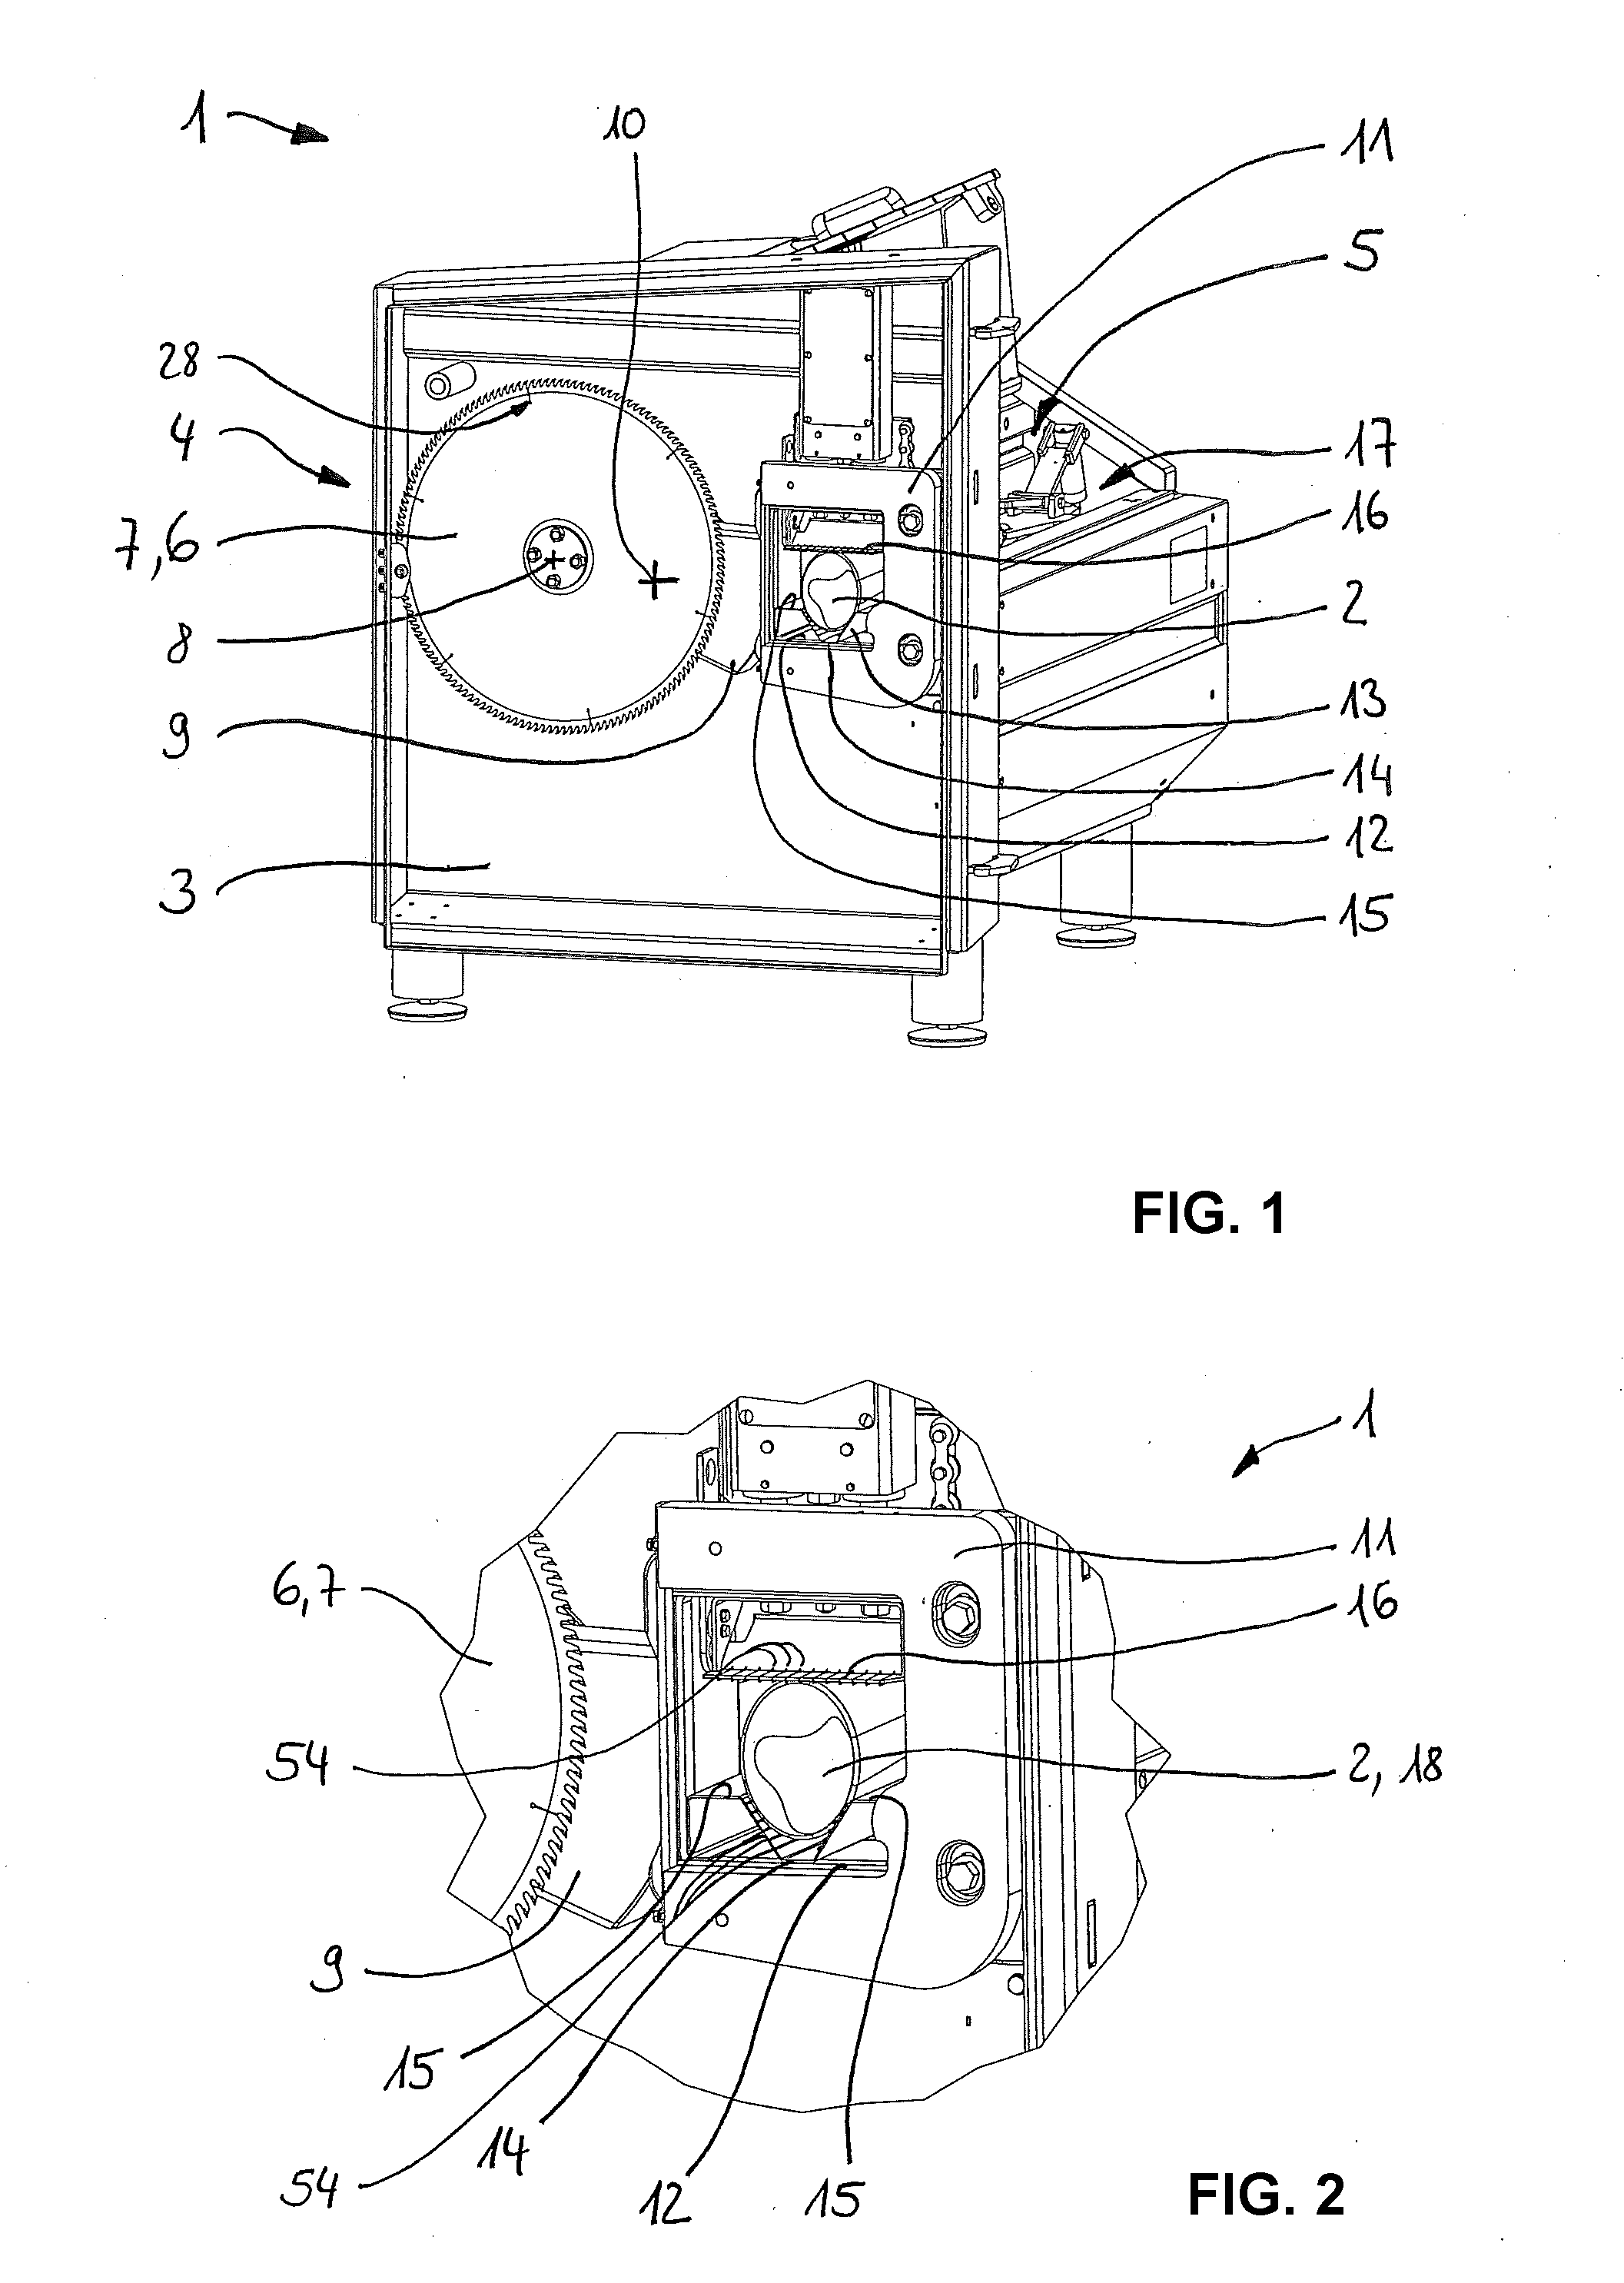 Device and method for cutting a frozen food strand into slices